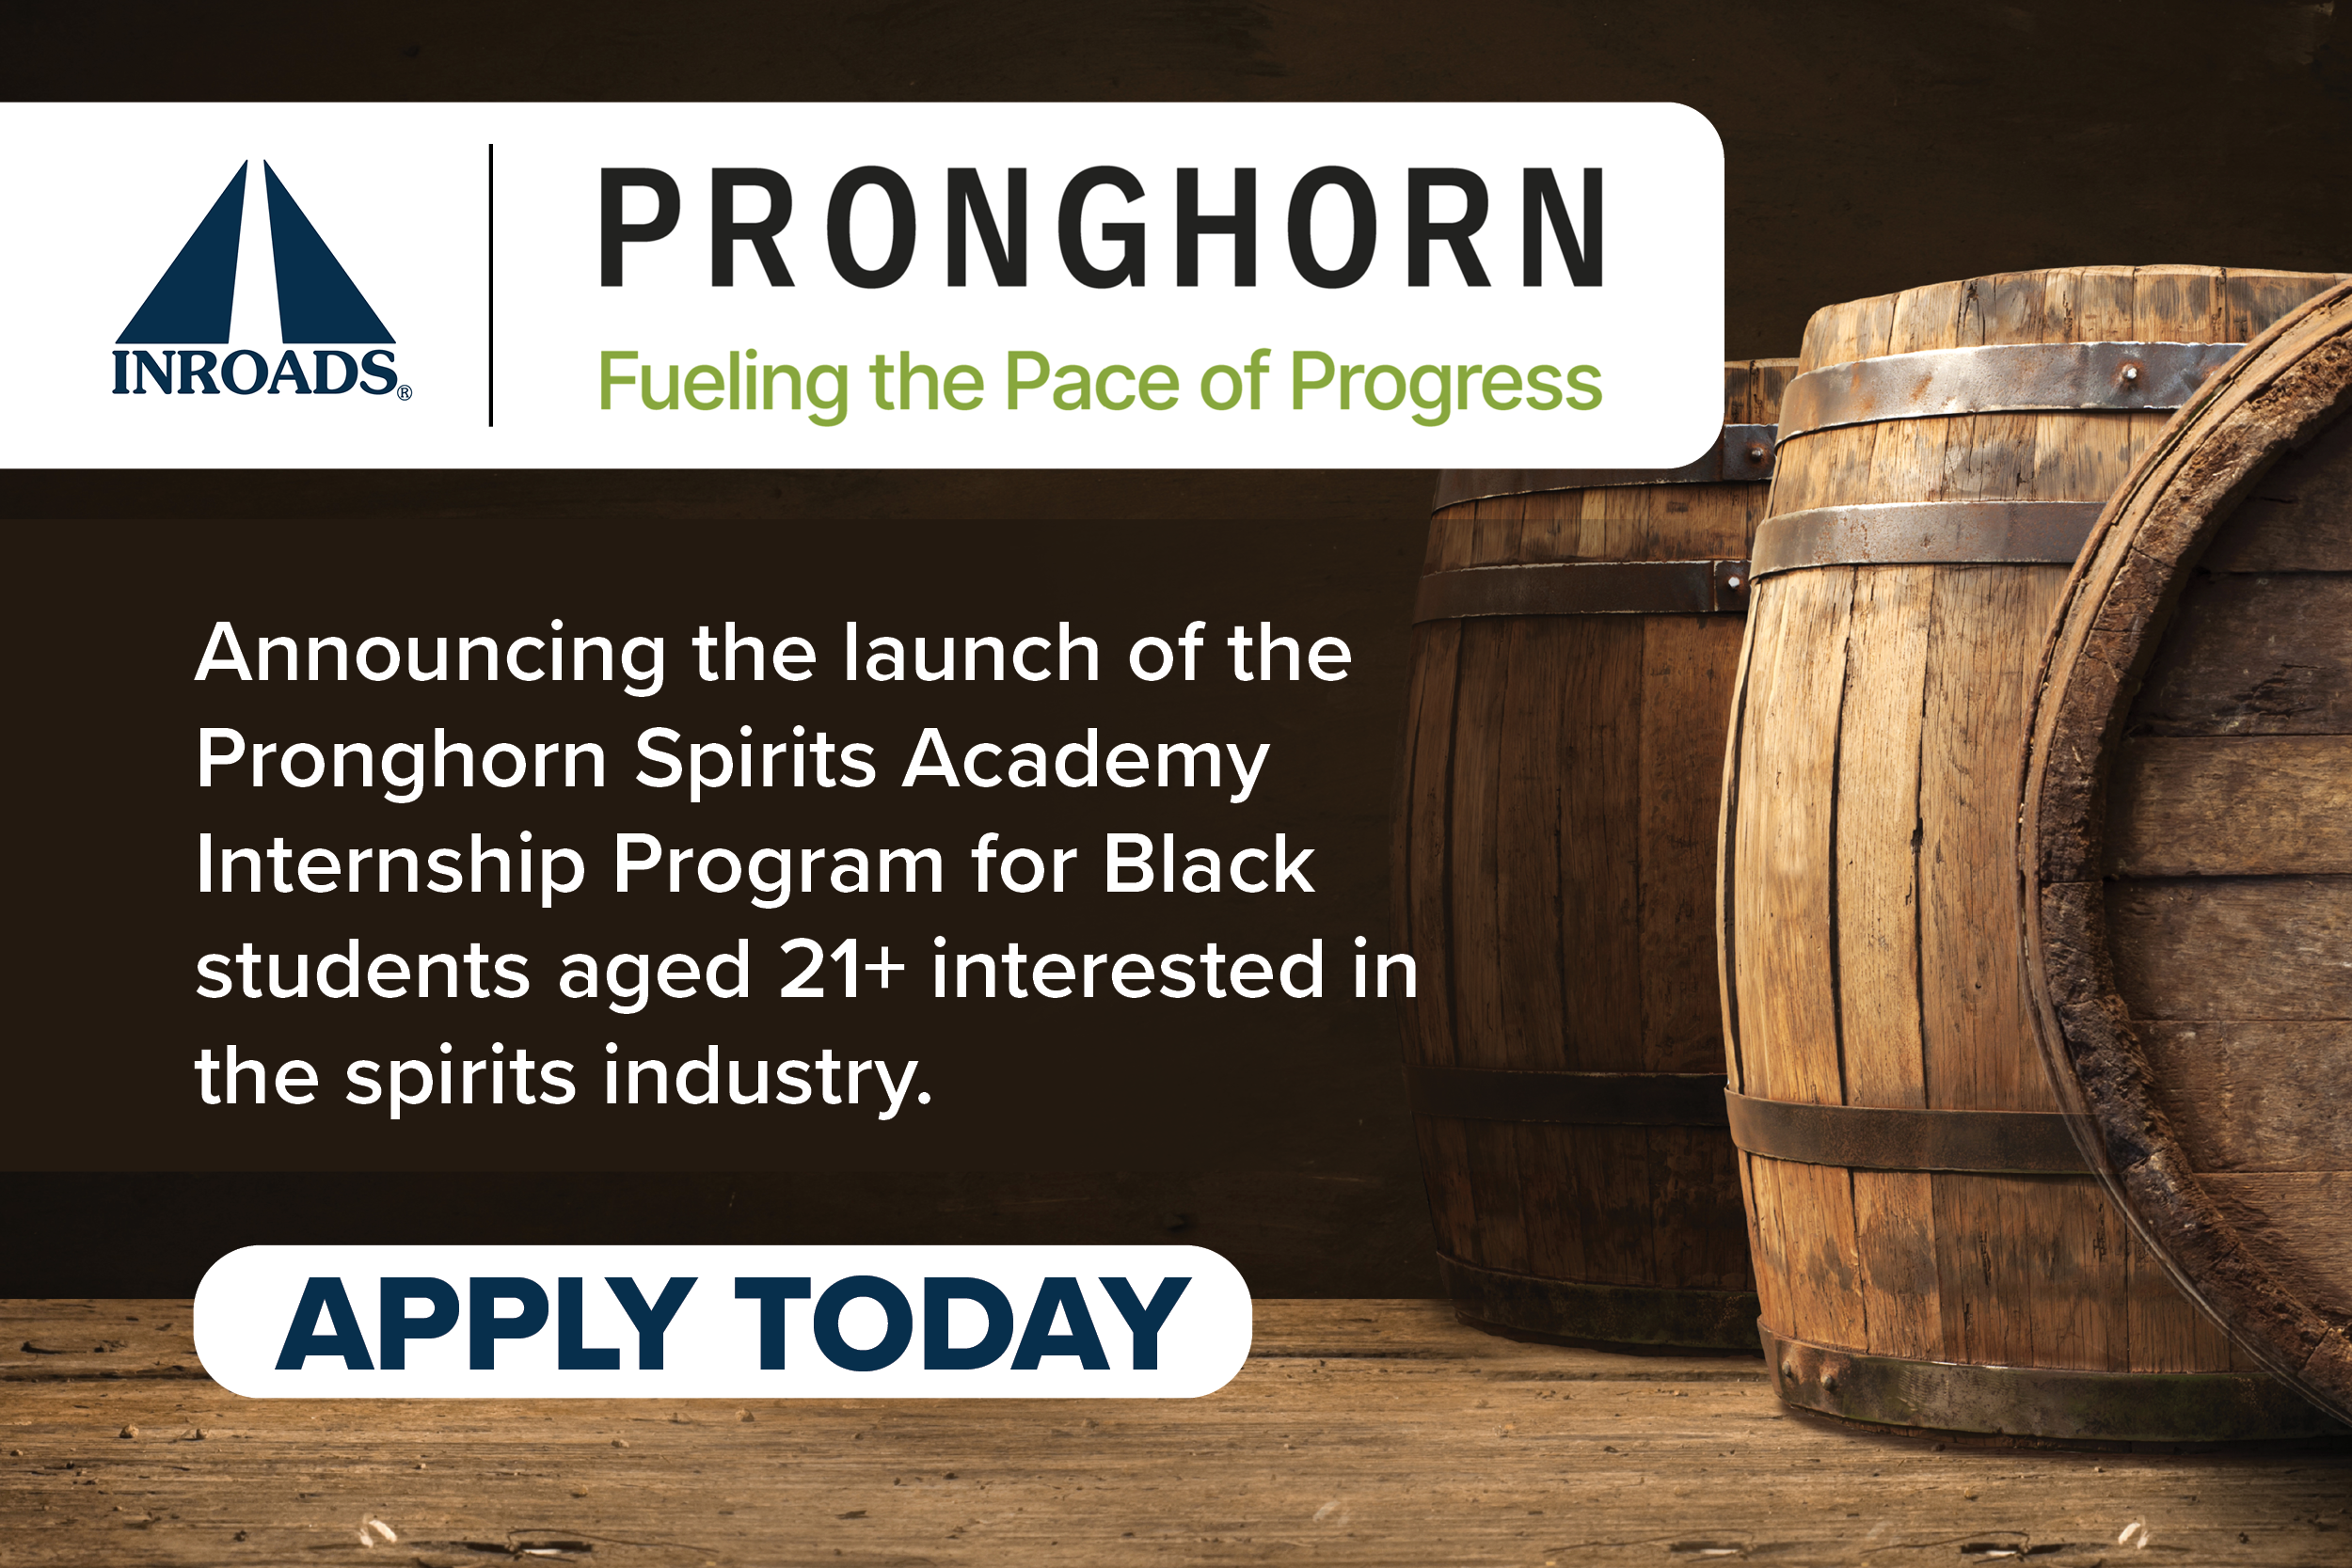 Featured image for “PRONGHORN SPIRITS ACADEMY LAUNCHES INTERNSHIP PROGRAM IN PARTNERSHIP WITH INROADS FOR BLACK STUDENTS INTERESTED IN  CAREERS WITHIN THE SPIRITS INDUSTRY”